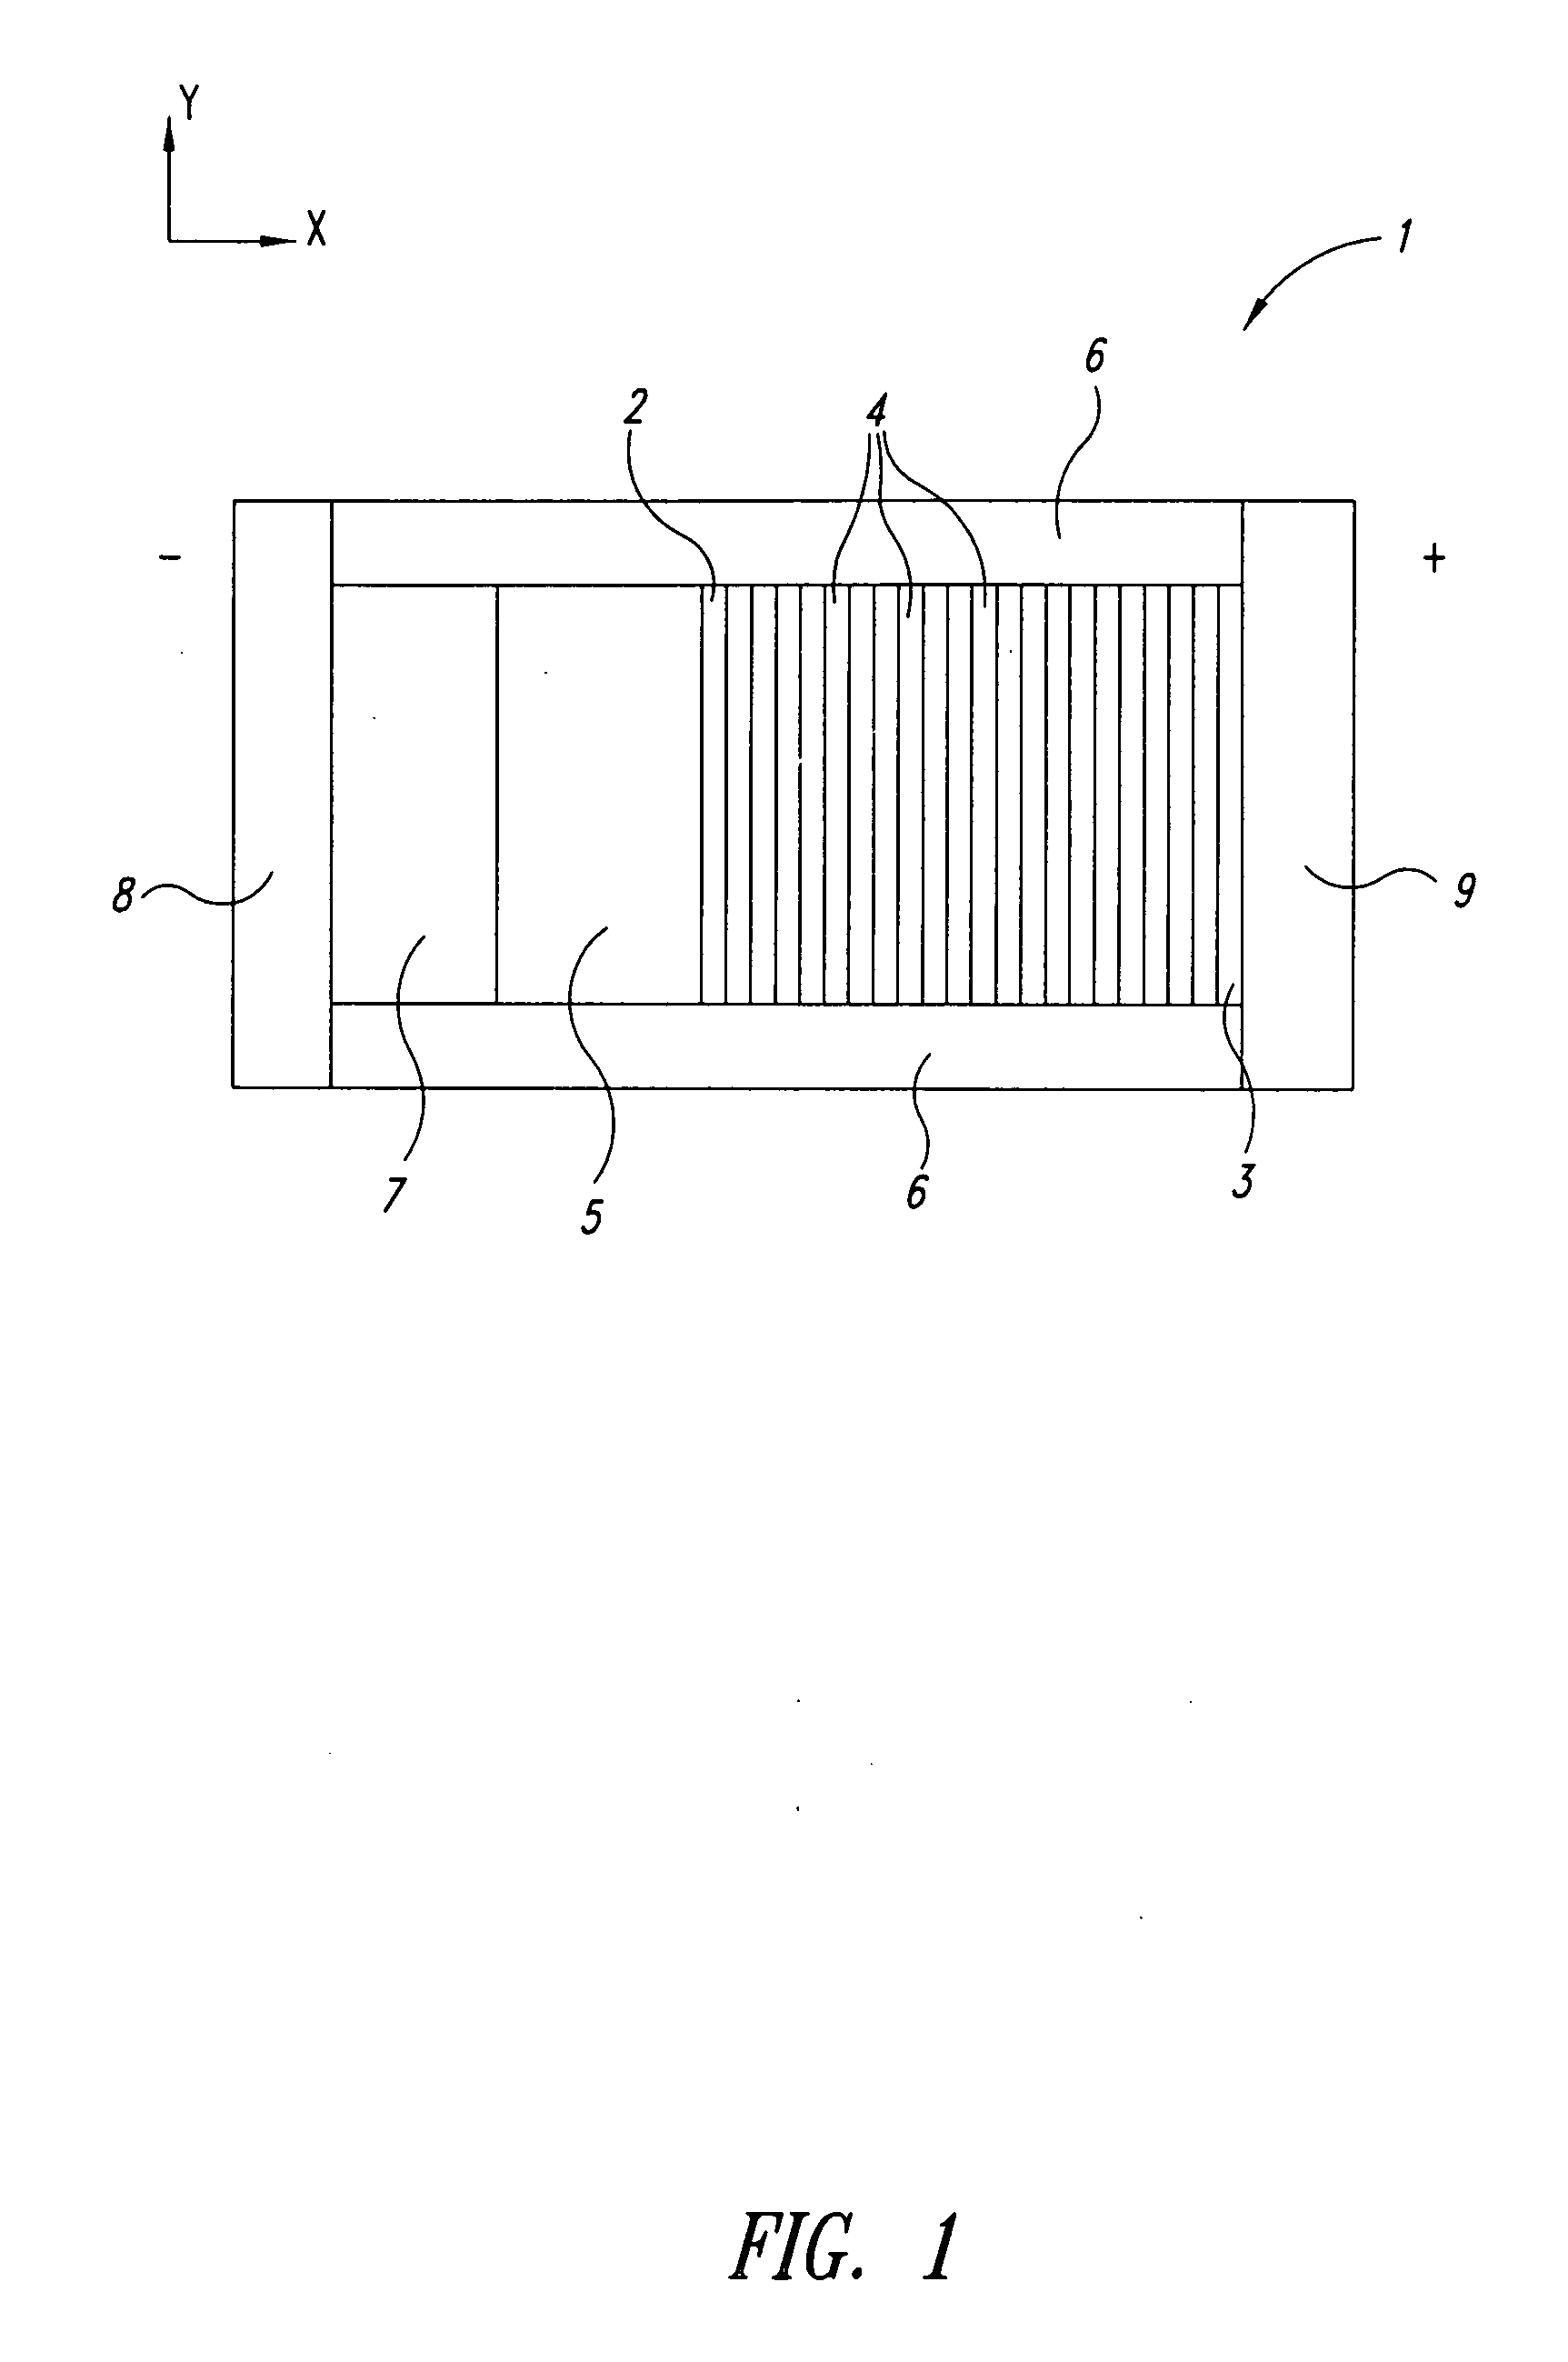 Shutdown methods and designs for fuel cell stacks